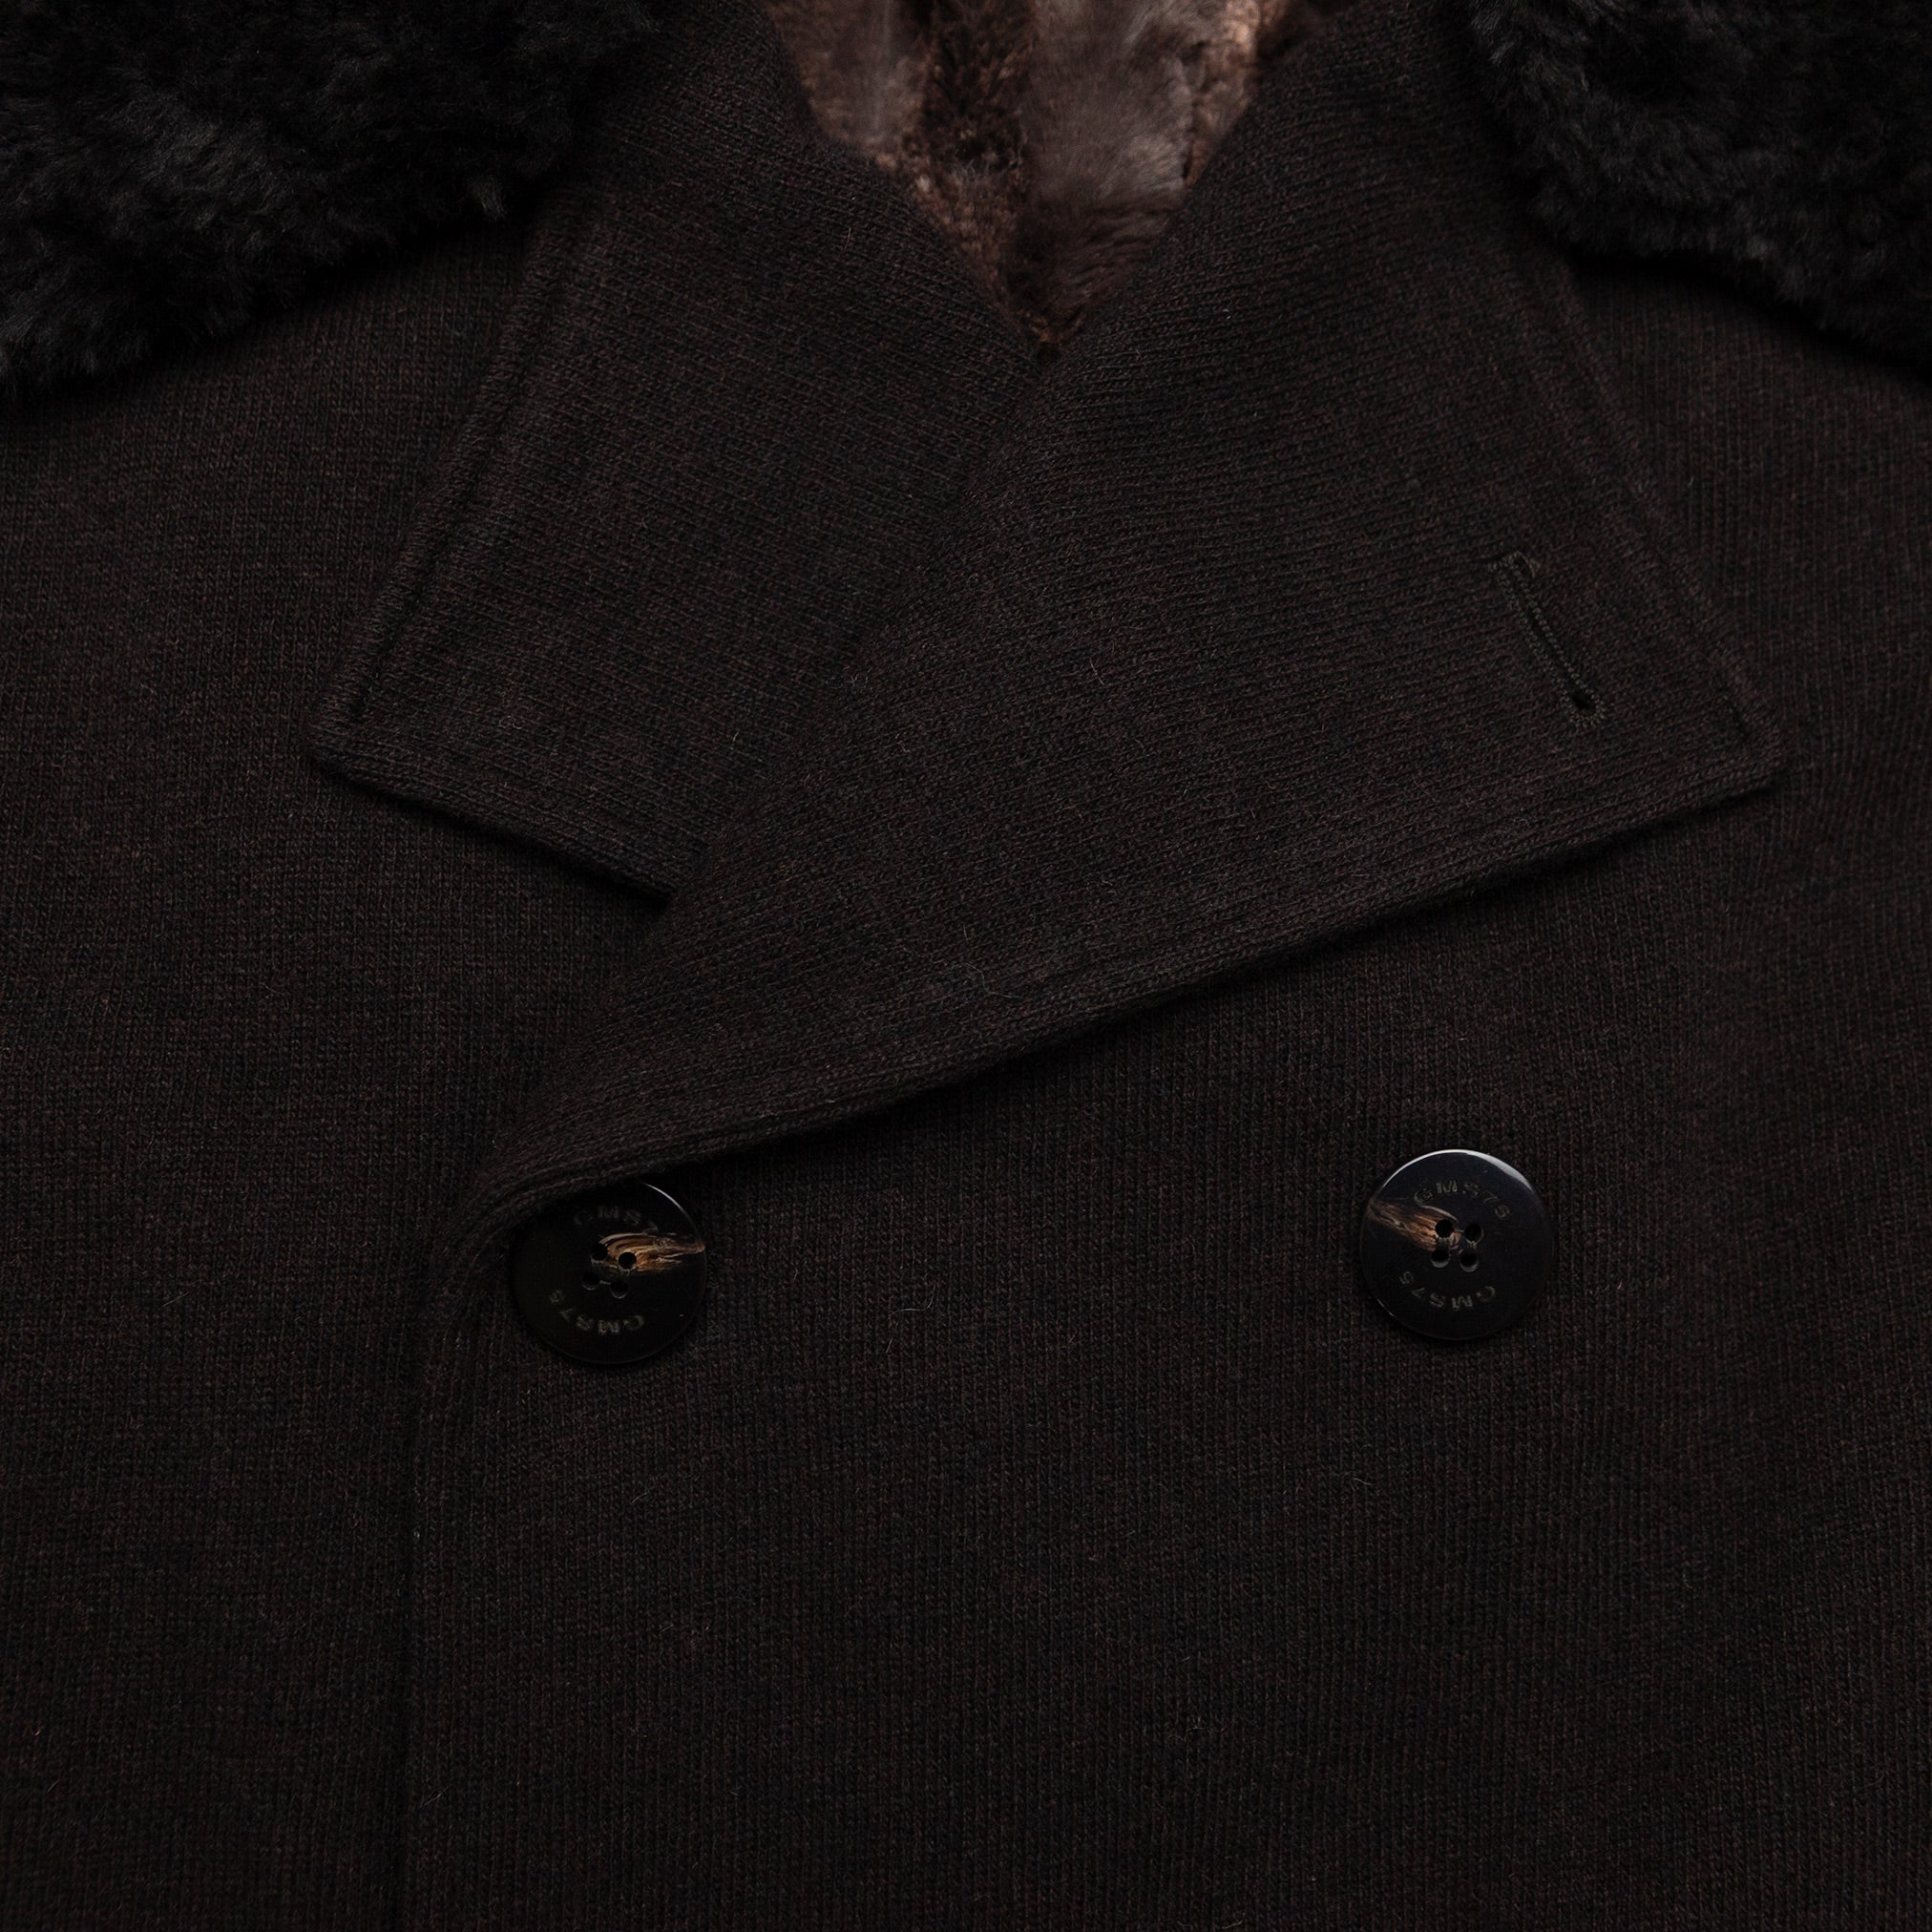 Lined Double Breasted Packer Coat in Dark Brown